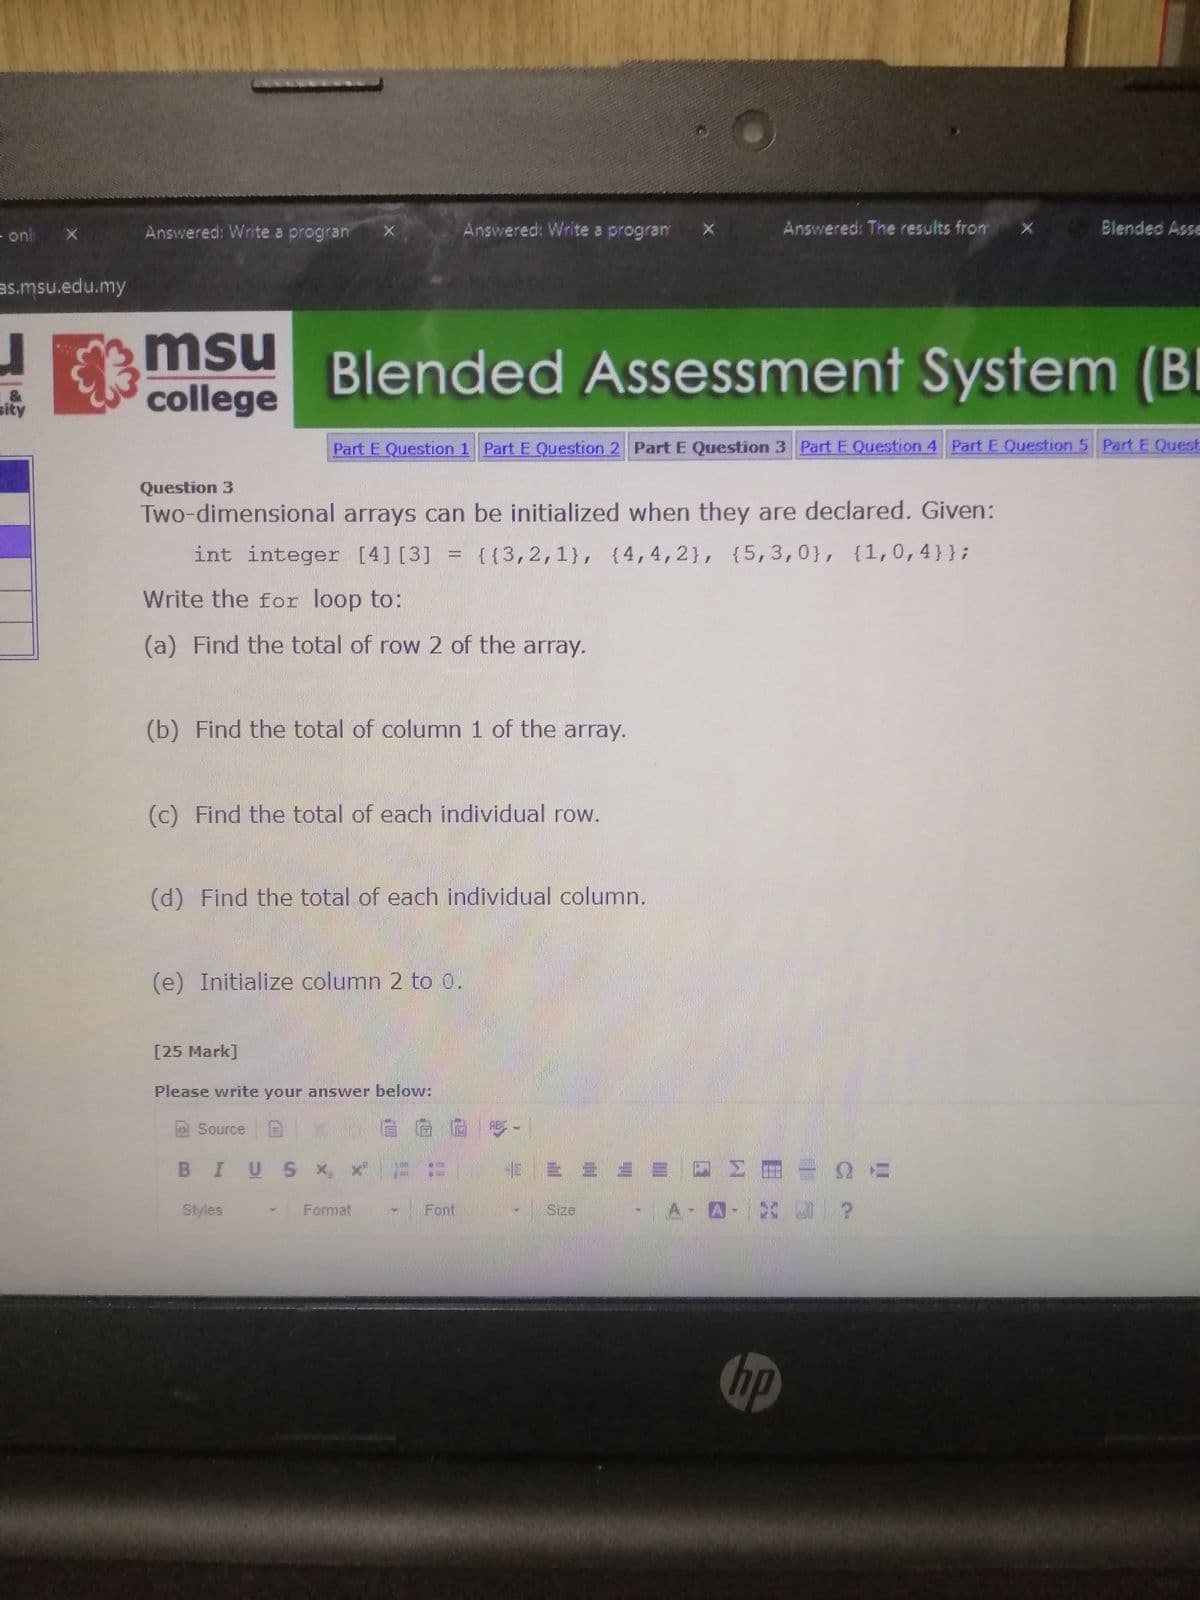 - onl
Answered: Write a progran
Answered: Write a program
Answered: The results from
1 Blended Asse
as.msu.edu.my
msu
college
Blended Assessment System (B
I
&
sity
Part E Question 1 Part E Question 2 Part E Question 3 Part E Question 4 Part E Question 5 Part E Quest
Question 3
Two-dimensional arrays can be initialized when they are declared. Given:
int integer [4] [3]
{{3,2,1}, {4,4,2}, {5,3,0}, {1,0,4}};
Write the for loop to:
(a) Find the total of row 2 of the array.
(b) Find the total of column 1 of the array.
(c) Find the total of each individual row.
(d) Find the total of each individual column.
(e) Initialize column 2 to 0.
[25 Mark]
Please write your answer below:
Source
ABC
BIUS x,
Styles
Format
Font
Size
A-A
hp
liti
